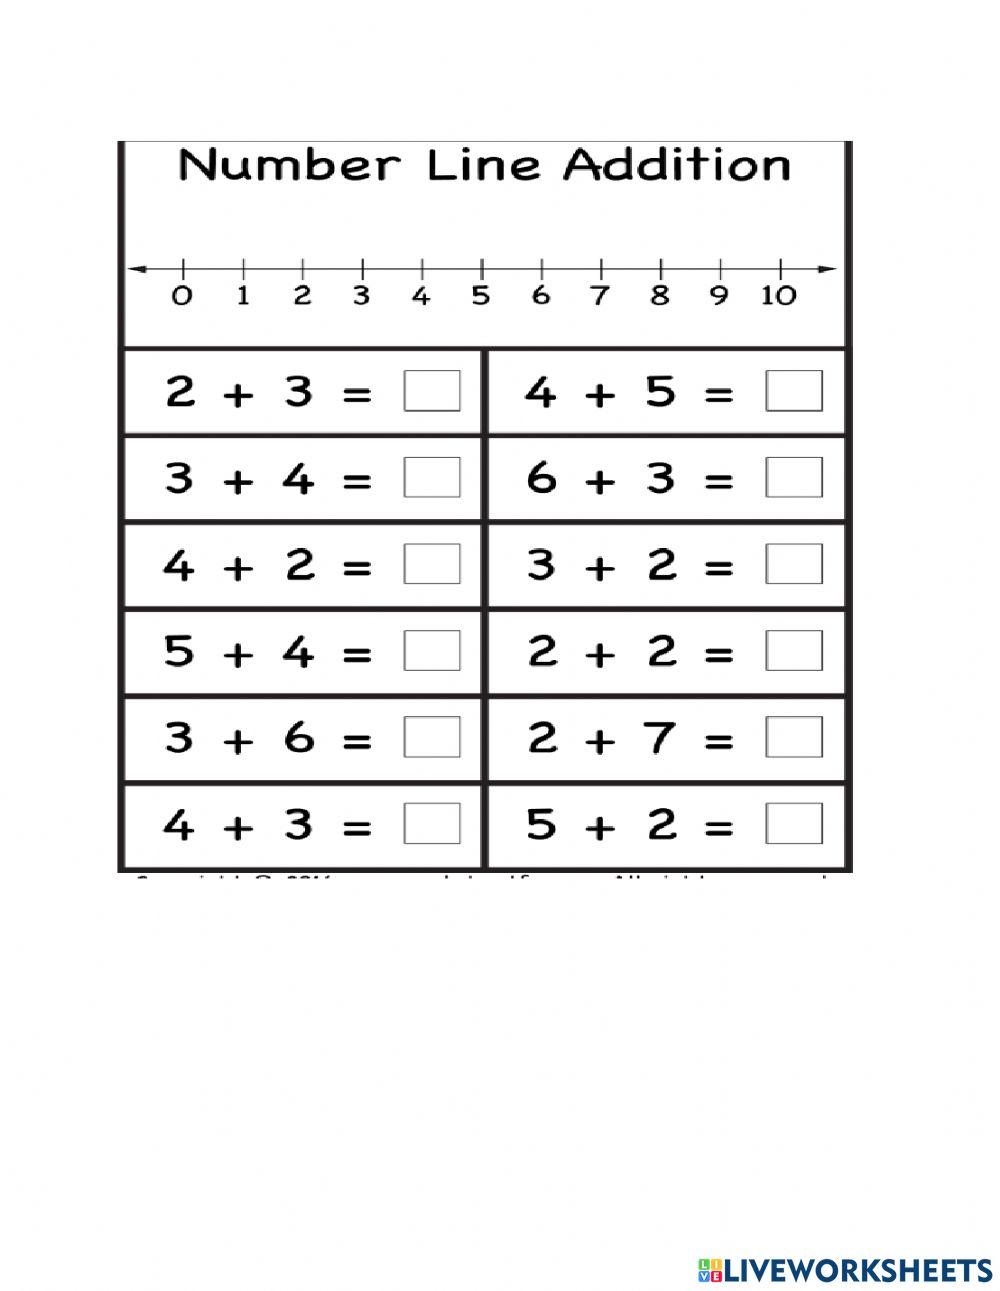 Add on Number line